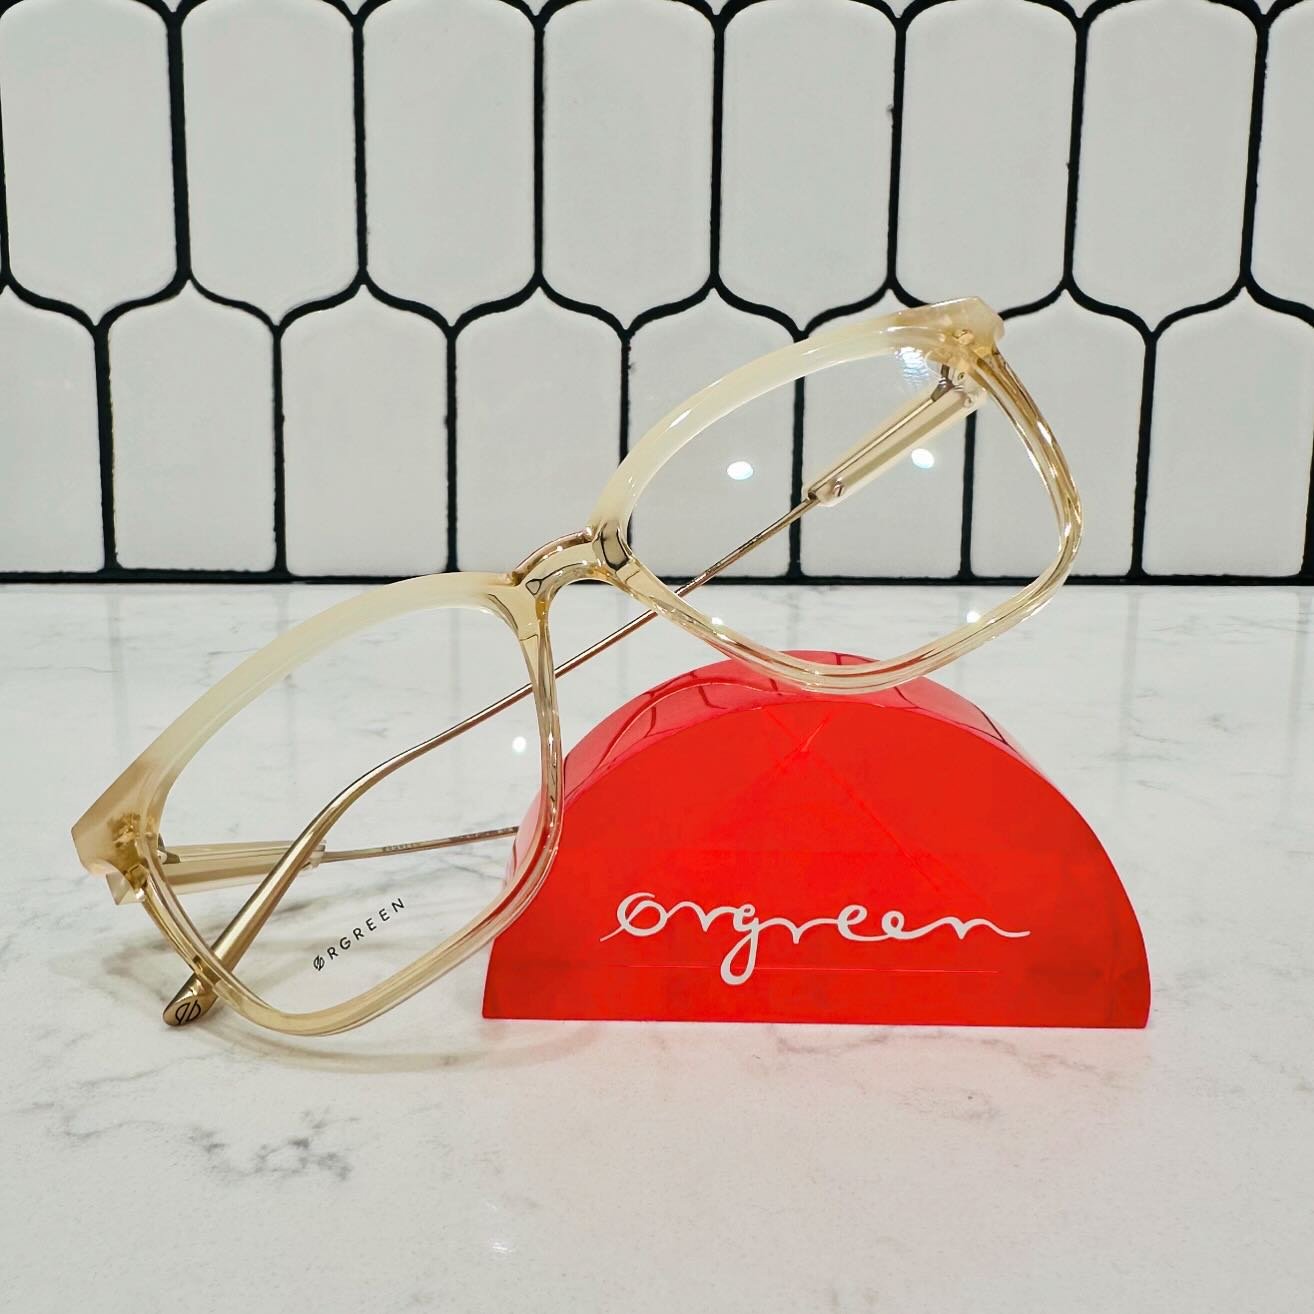 We&rsquo;ve noticed our patients are loving light colored frames lately like this @orgreenoptics stunner!! There&rsquo;s something about a good neutral 😍🙌🏻🤓 #orgreenoptics #eyes #eyeexam #eyeglasses #glasses #sunglasses #eyedoctor #optometry #opt